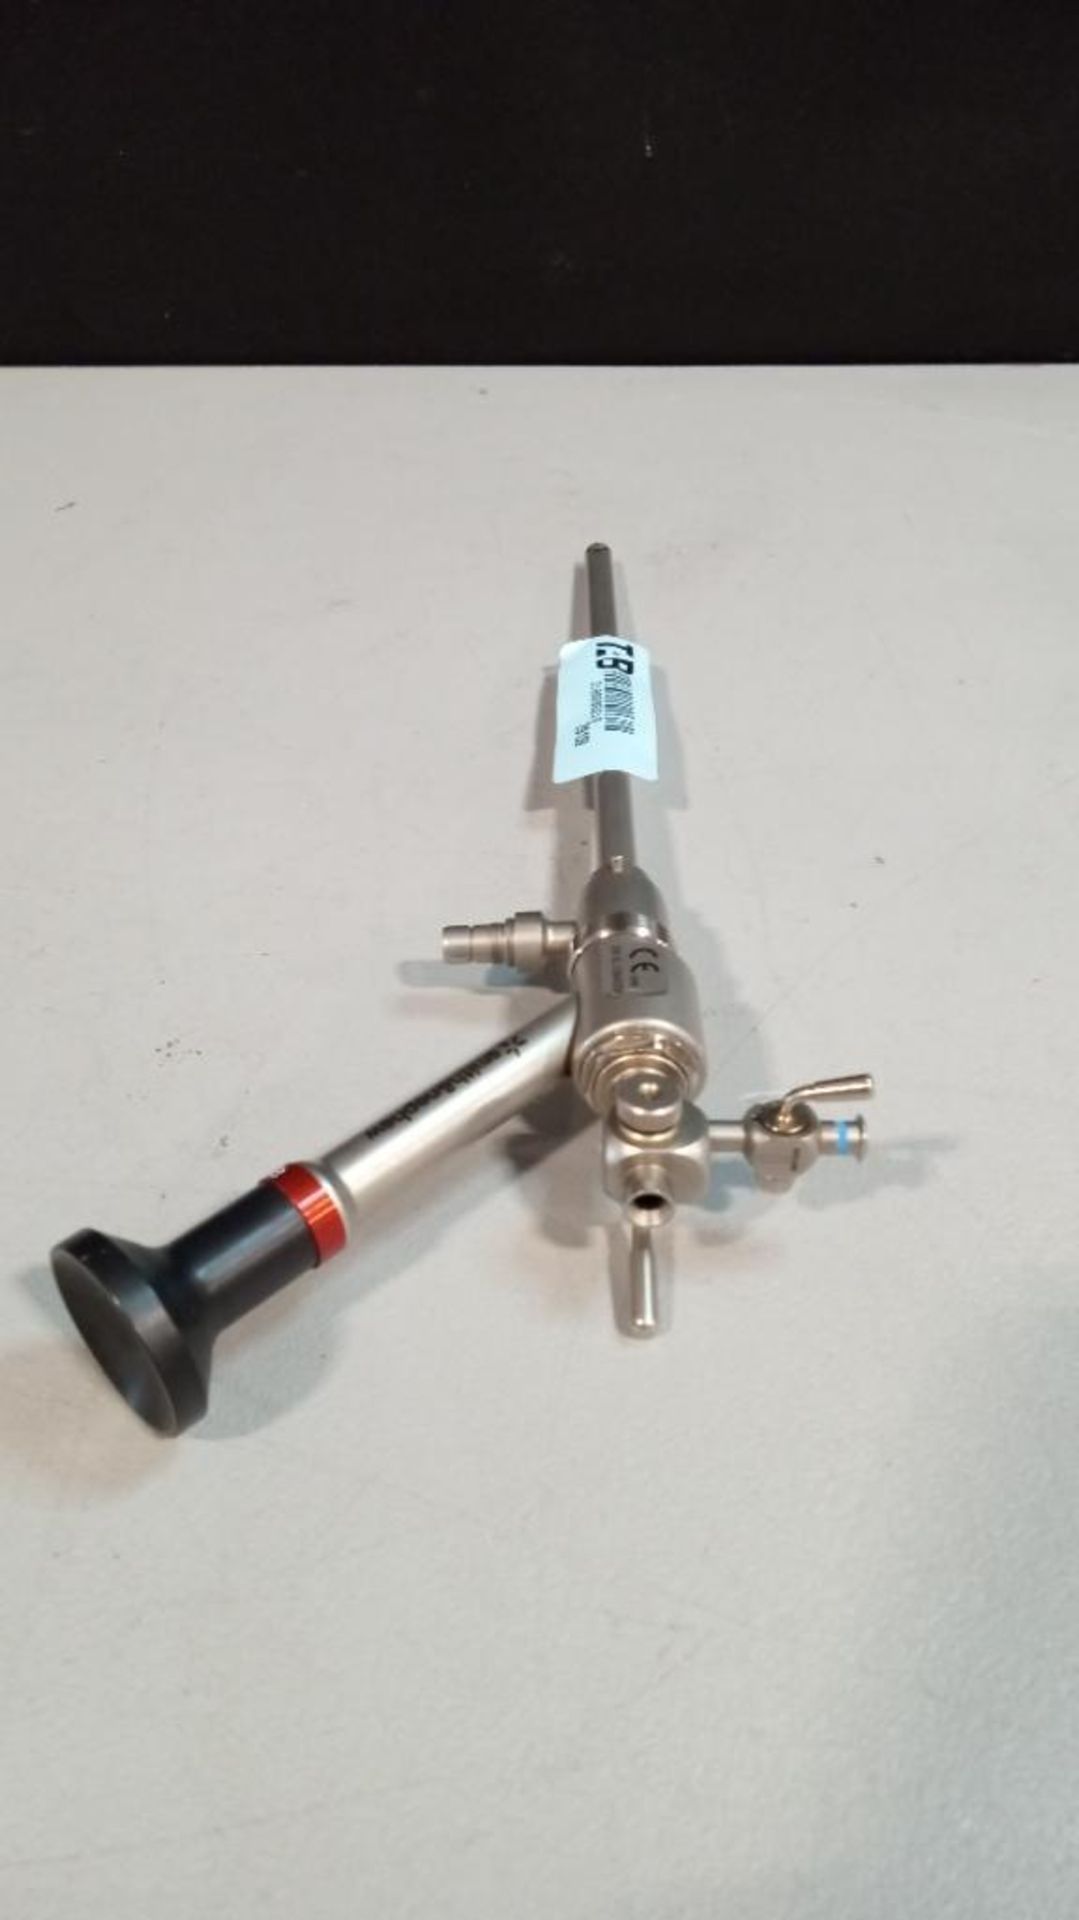 SMITH & NEPHEW 7209208 TRUCLEAR 0 DEGREE AUTOCLAVABLE HYSTEROSCOPE - Image 2 of 2